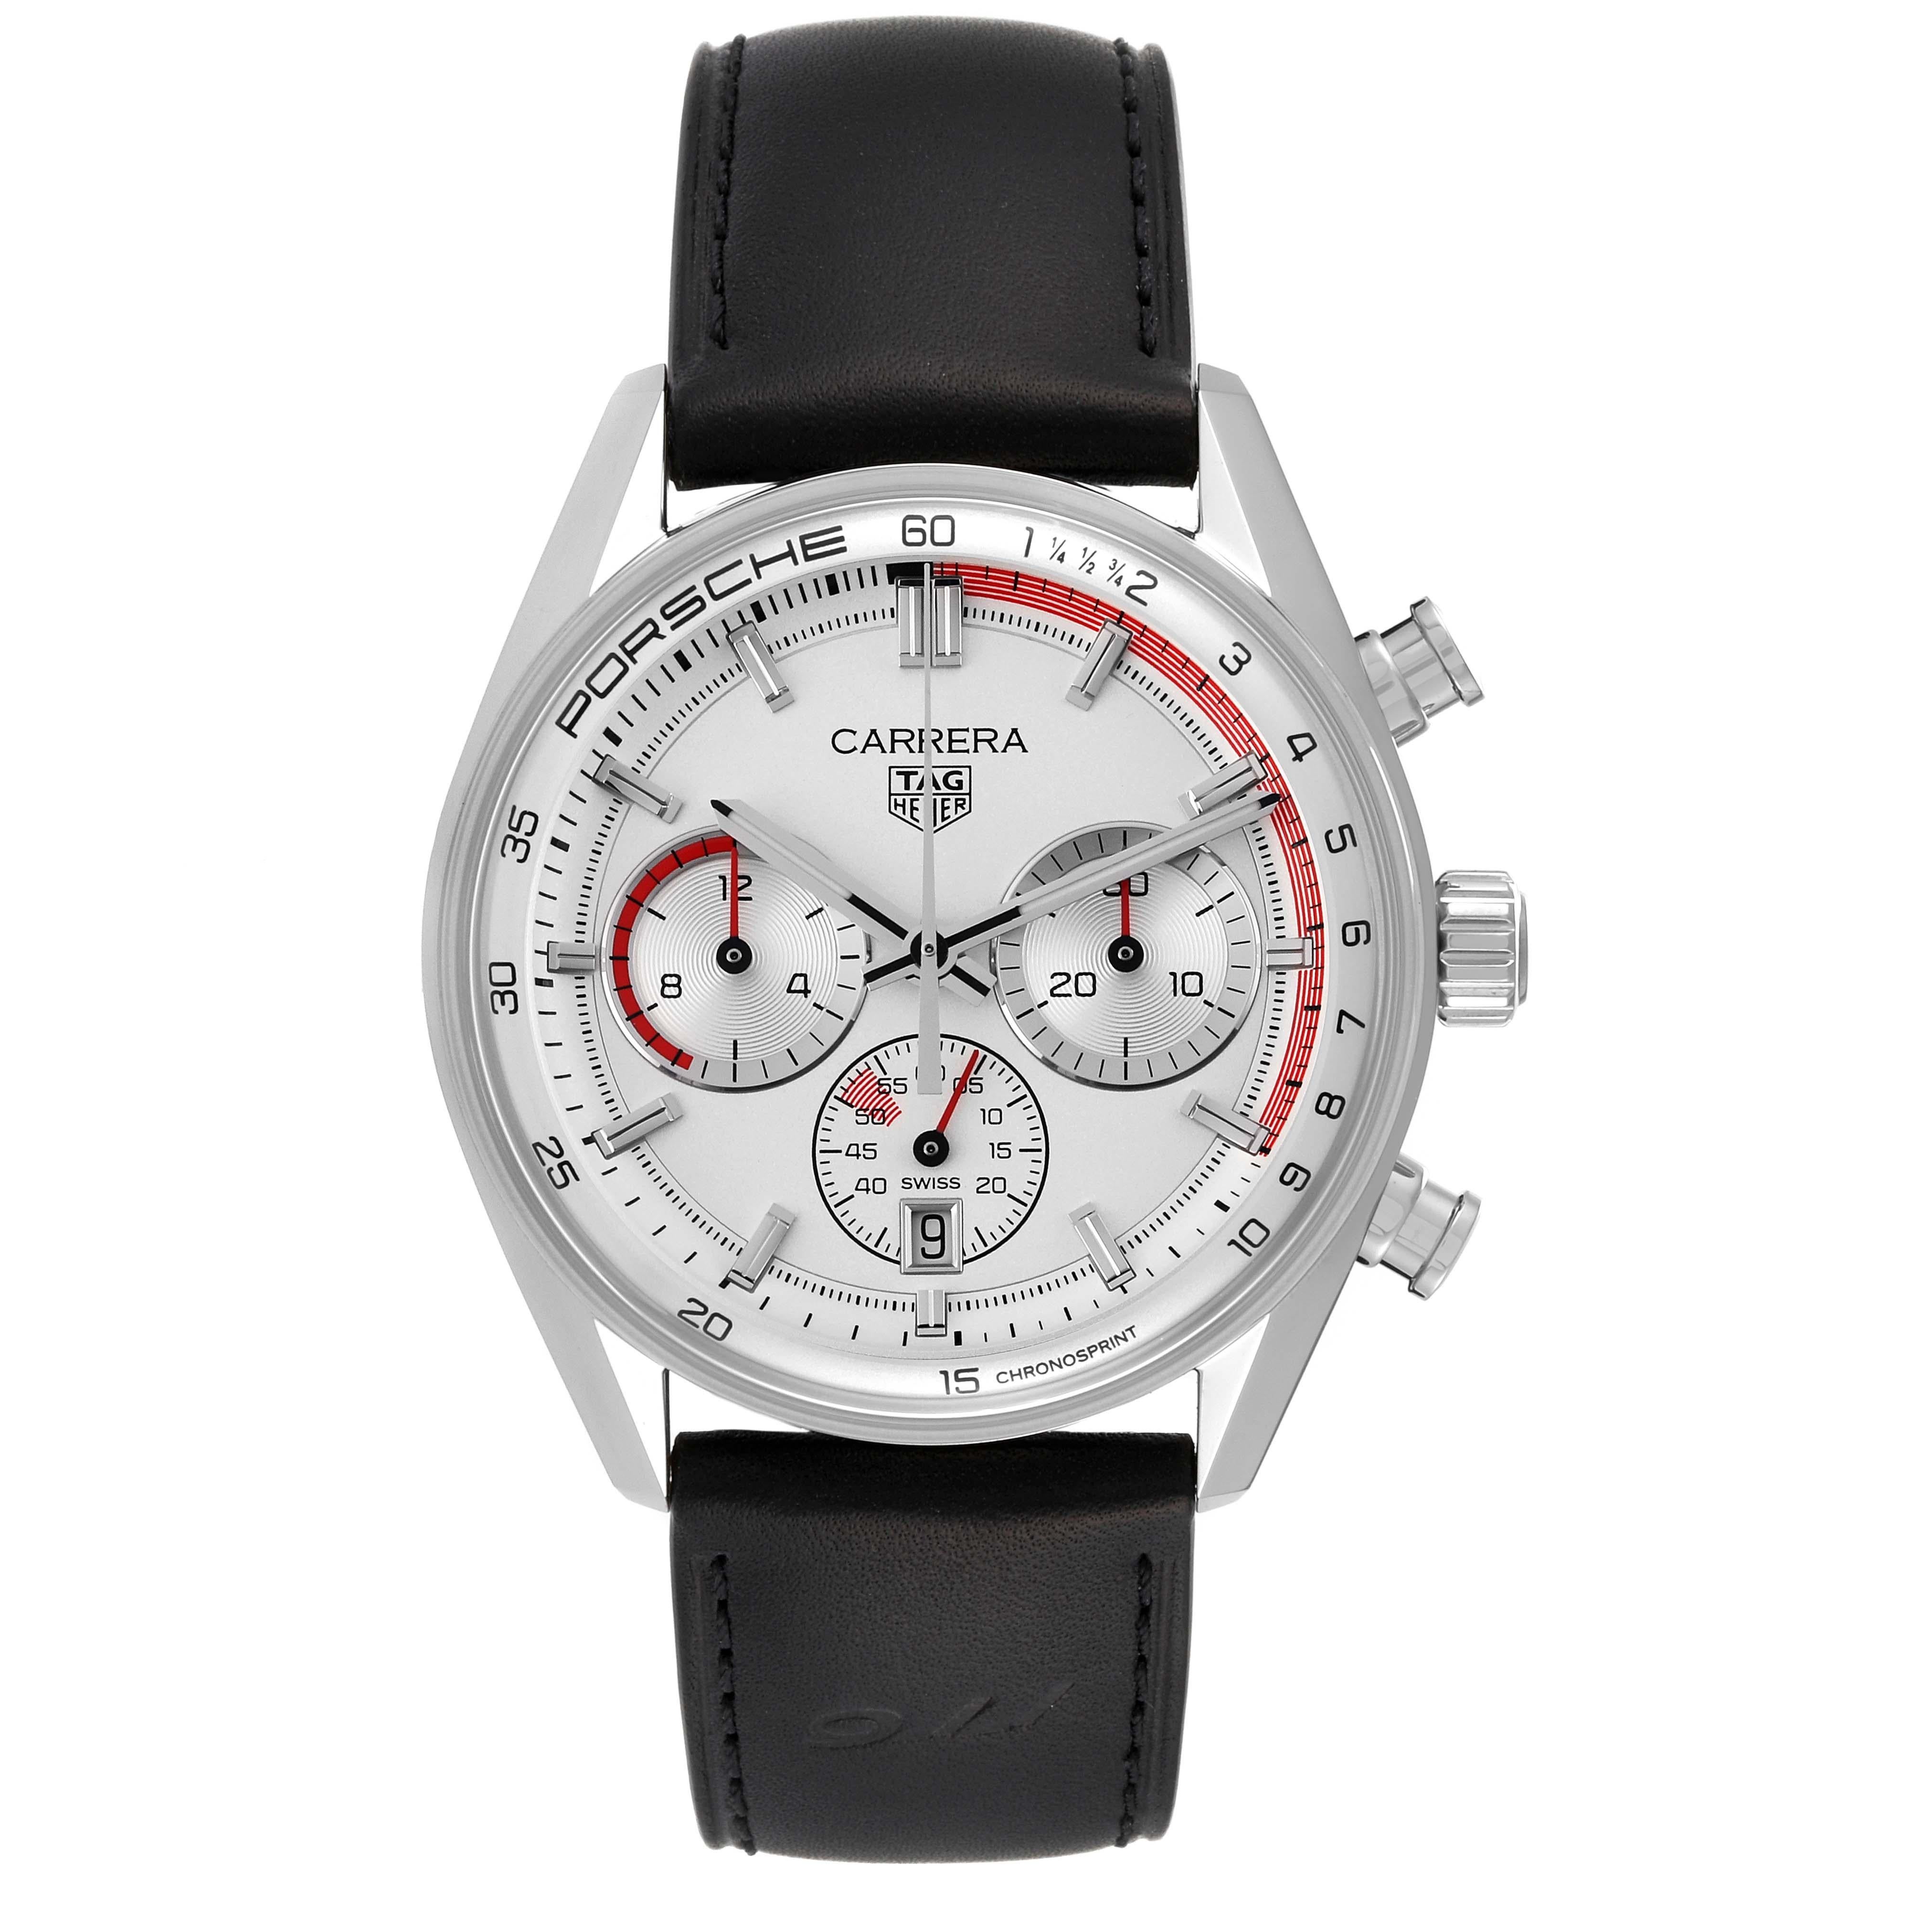 Tag Heuer Carrera Chronosprint X Porsche Special Edition Steel Mens Watch CBS2011 Unworn. Automatic self-winding chronograph movement. Brushed and polished stainless steel case 42.0 mm in diameter. Transparent exhibition sapphire crystal caseback. .